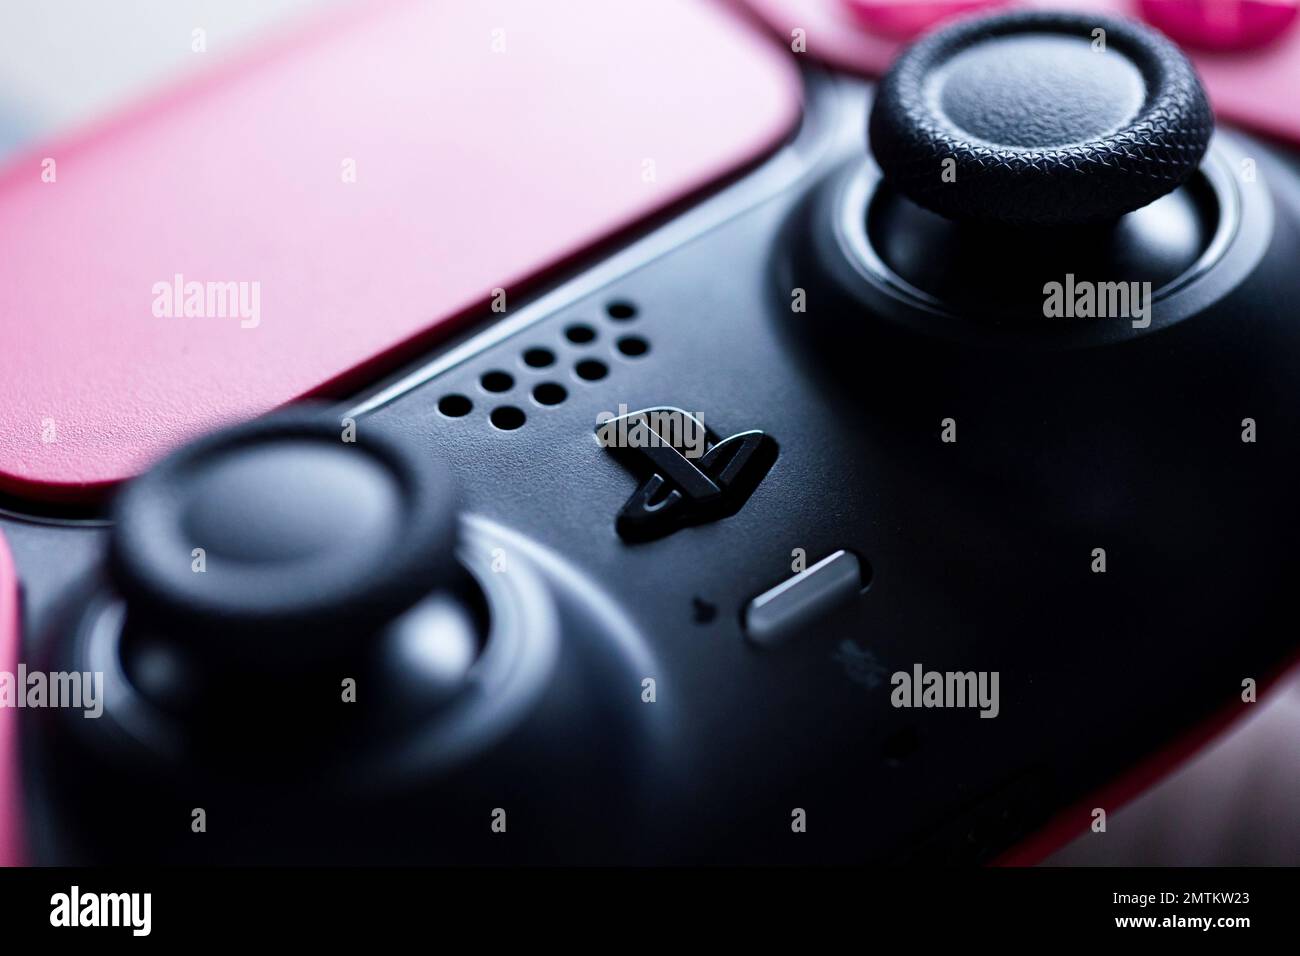 Brecht, Belgium - 26 januari 2023: A close up portrait of the logo,  touchpad and joysticks of a sony playstation 5 cosmic red wireless  controller Stock Photo - Alamy